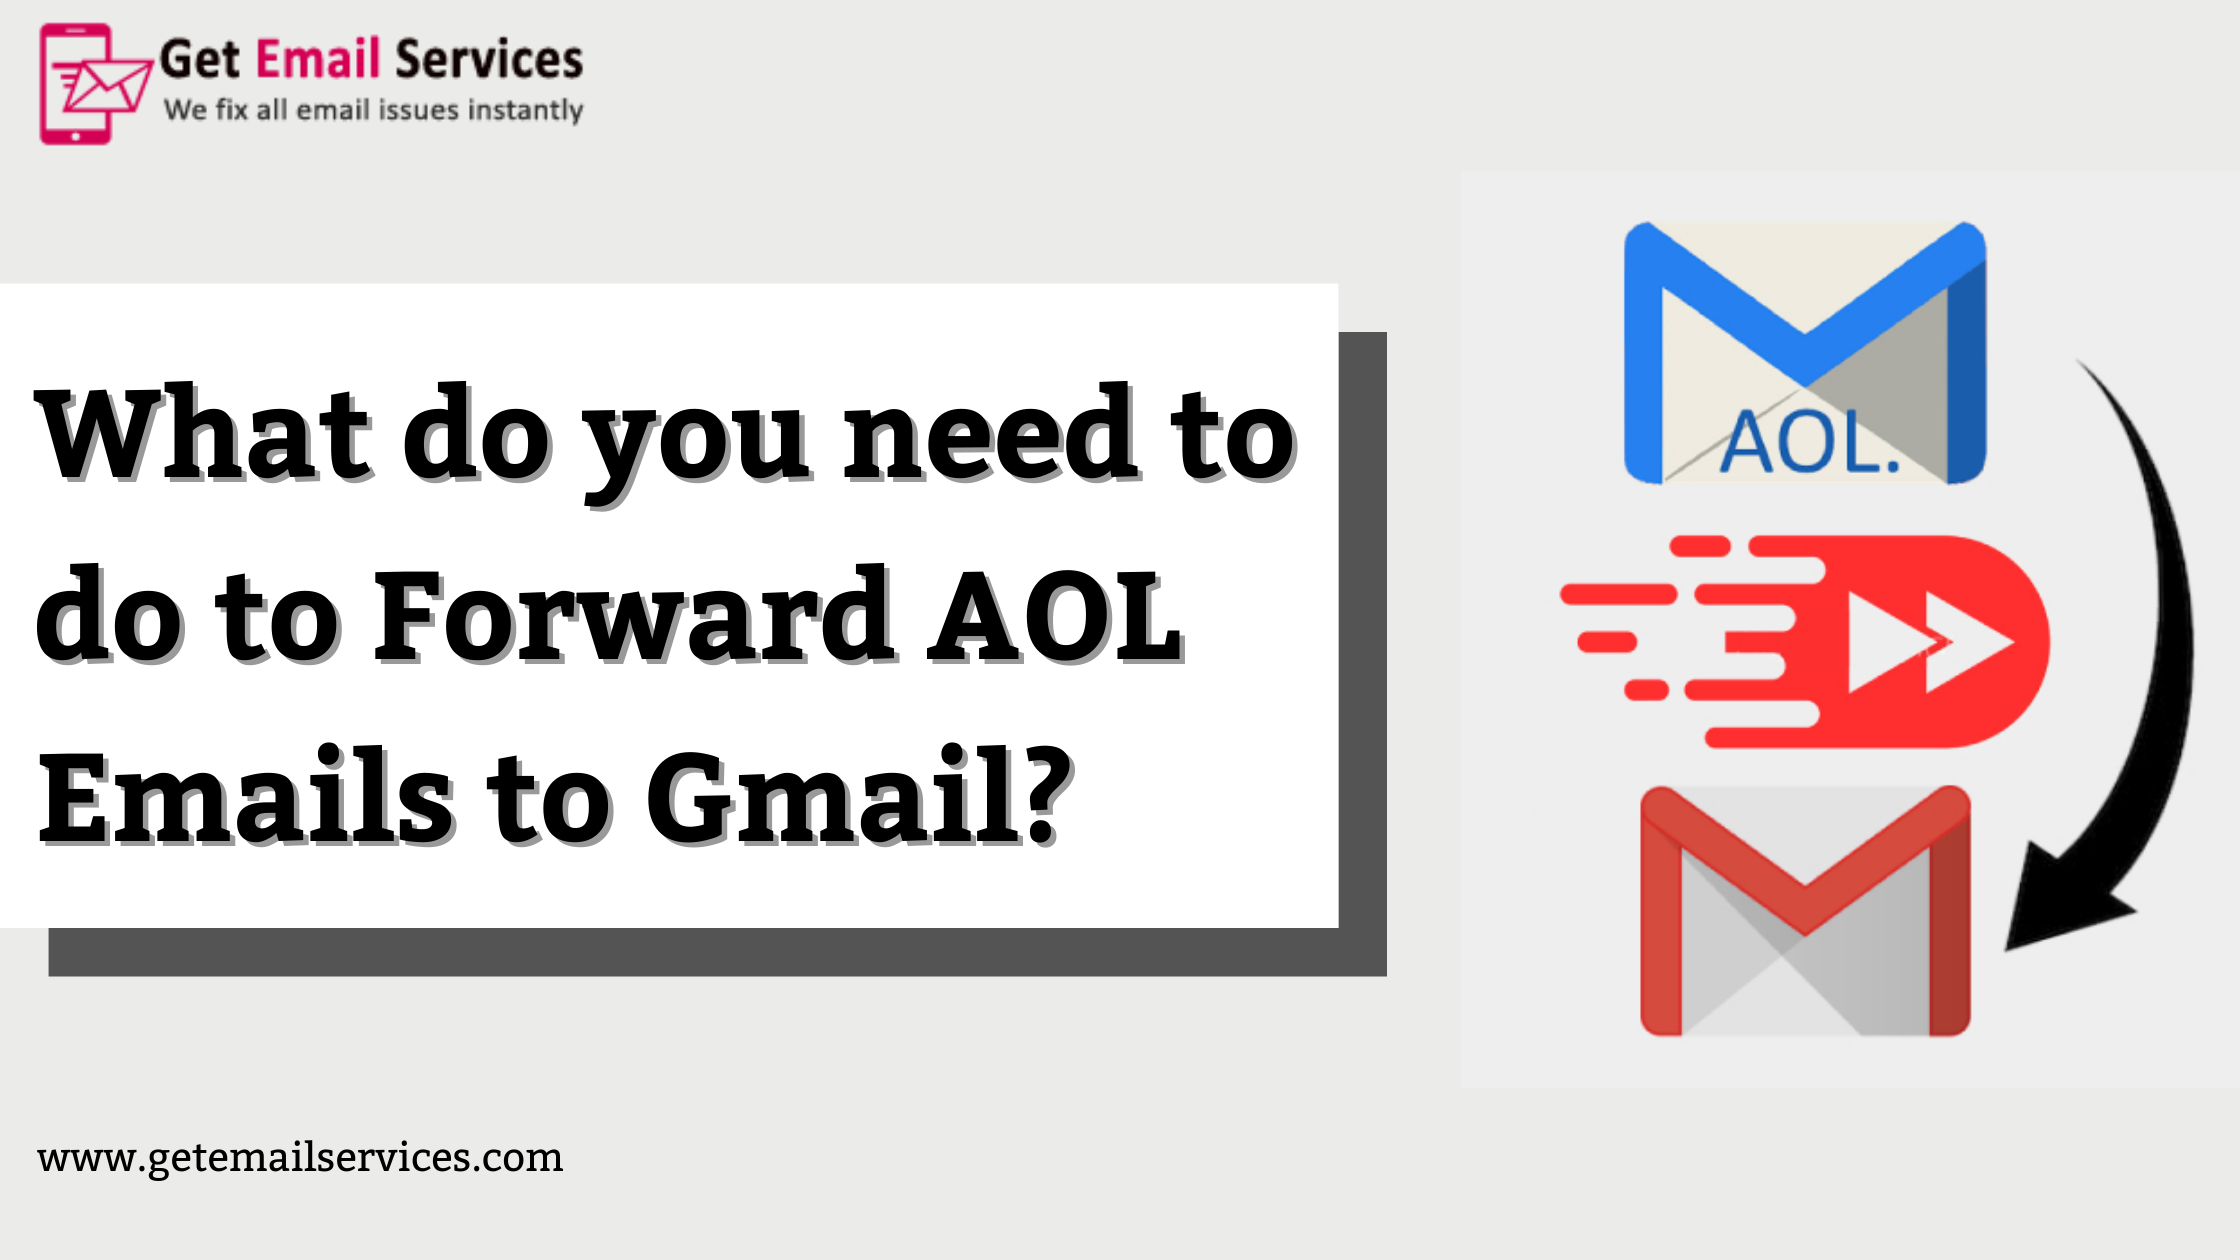 What do you need to do to Forward AOL Emails to Gmail?